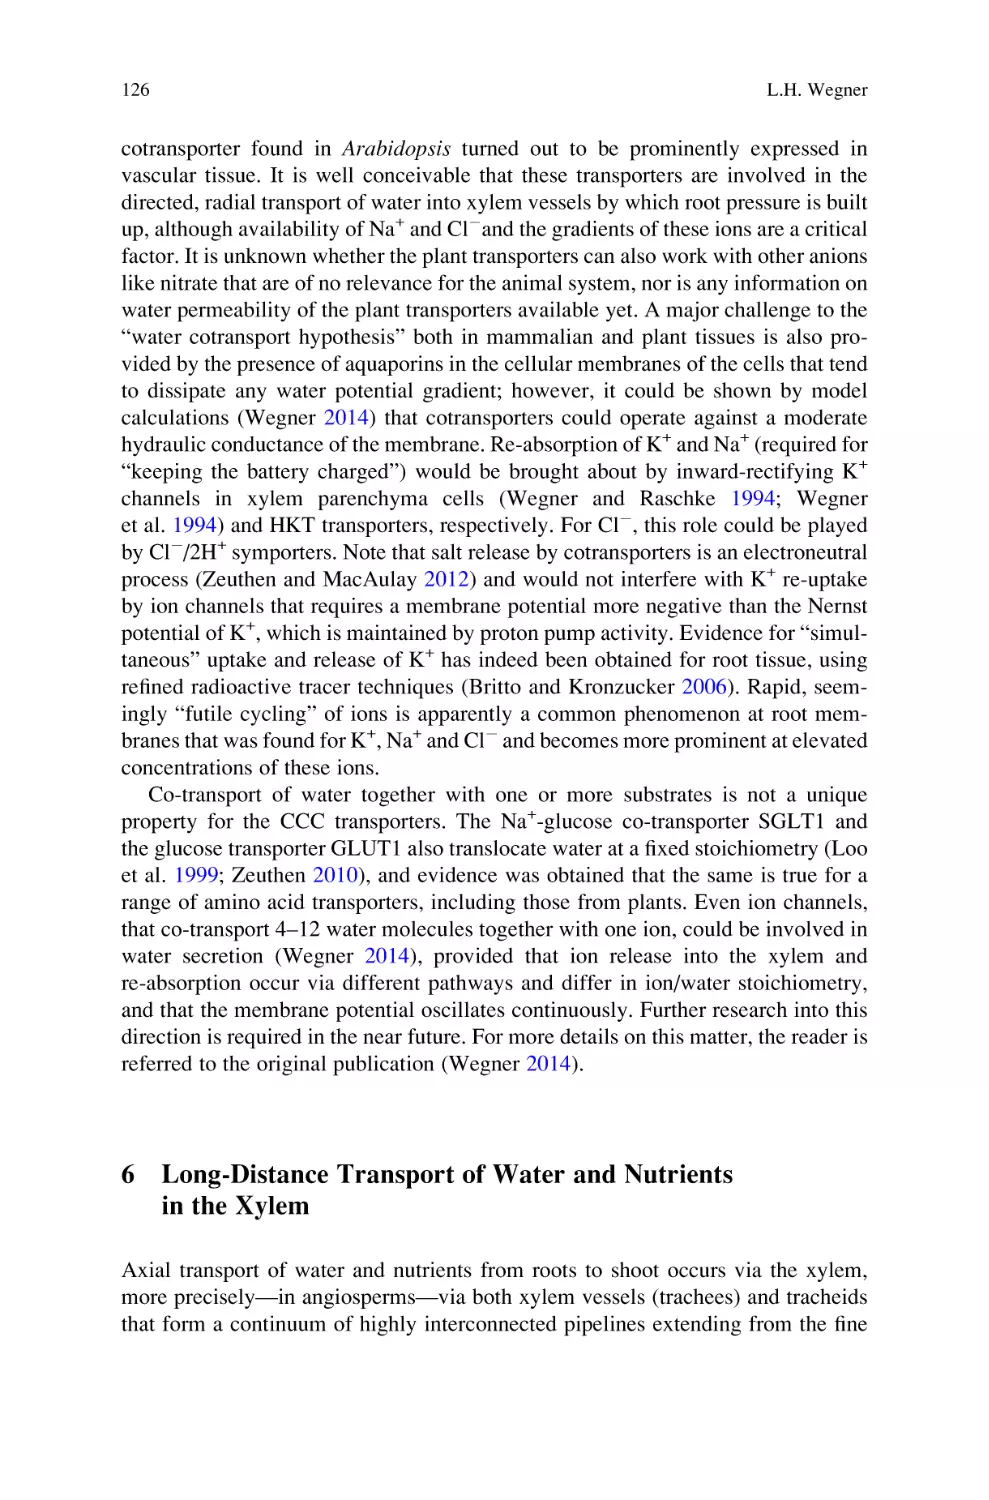 6 Long-Distance Transport of Water and Nutrients in the Xylem